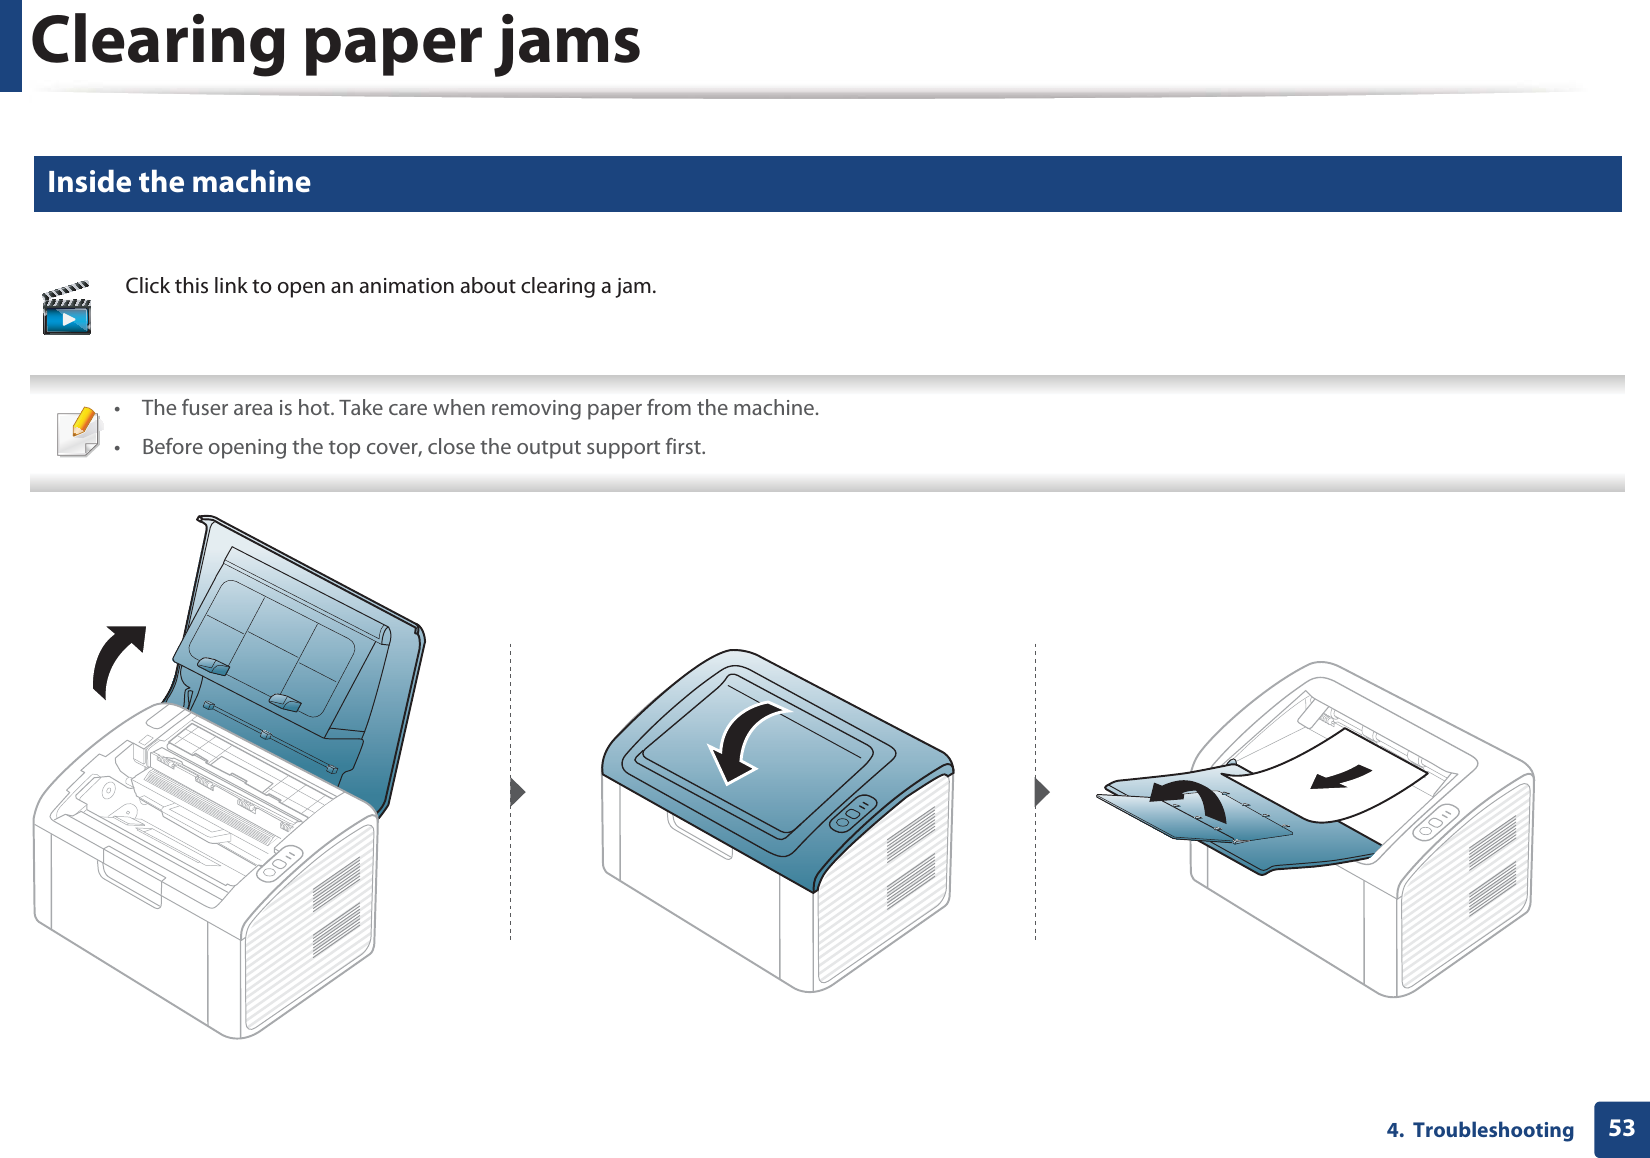 Clearing paper jams534.  Troubleshooting2 Inside the machine • The fuser area is hot. Take care when removing paper from the machine.• Before opening the top cover, close the output support first. Click this link to open an animation about clearing a jam.